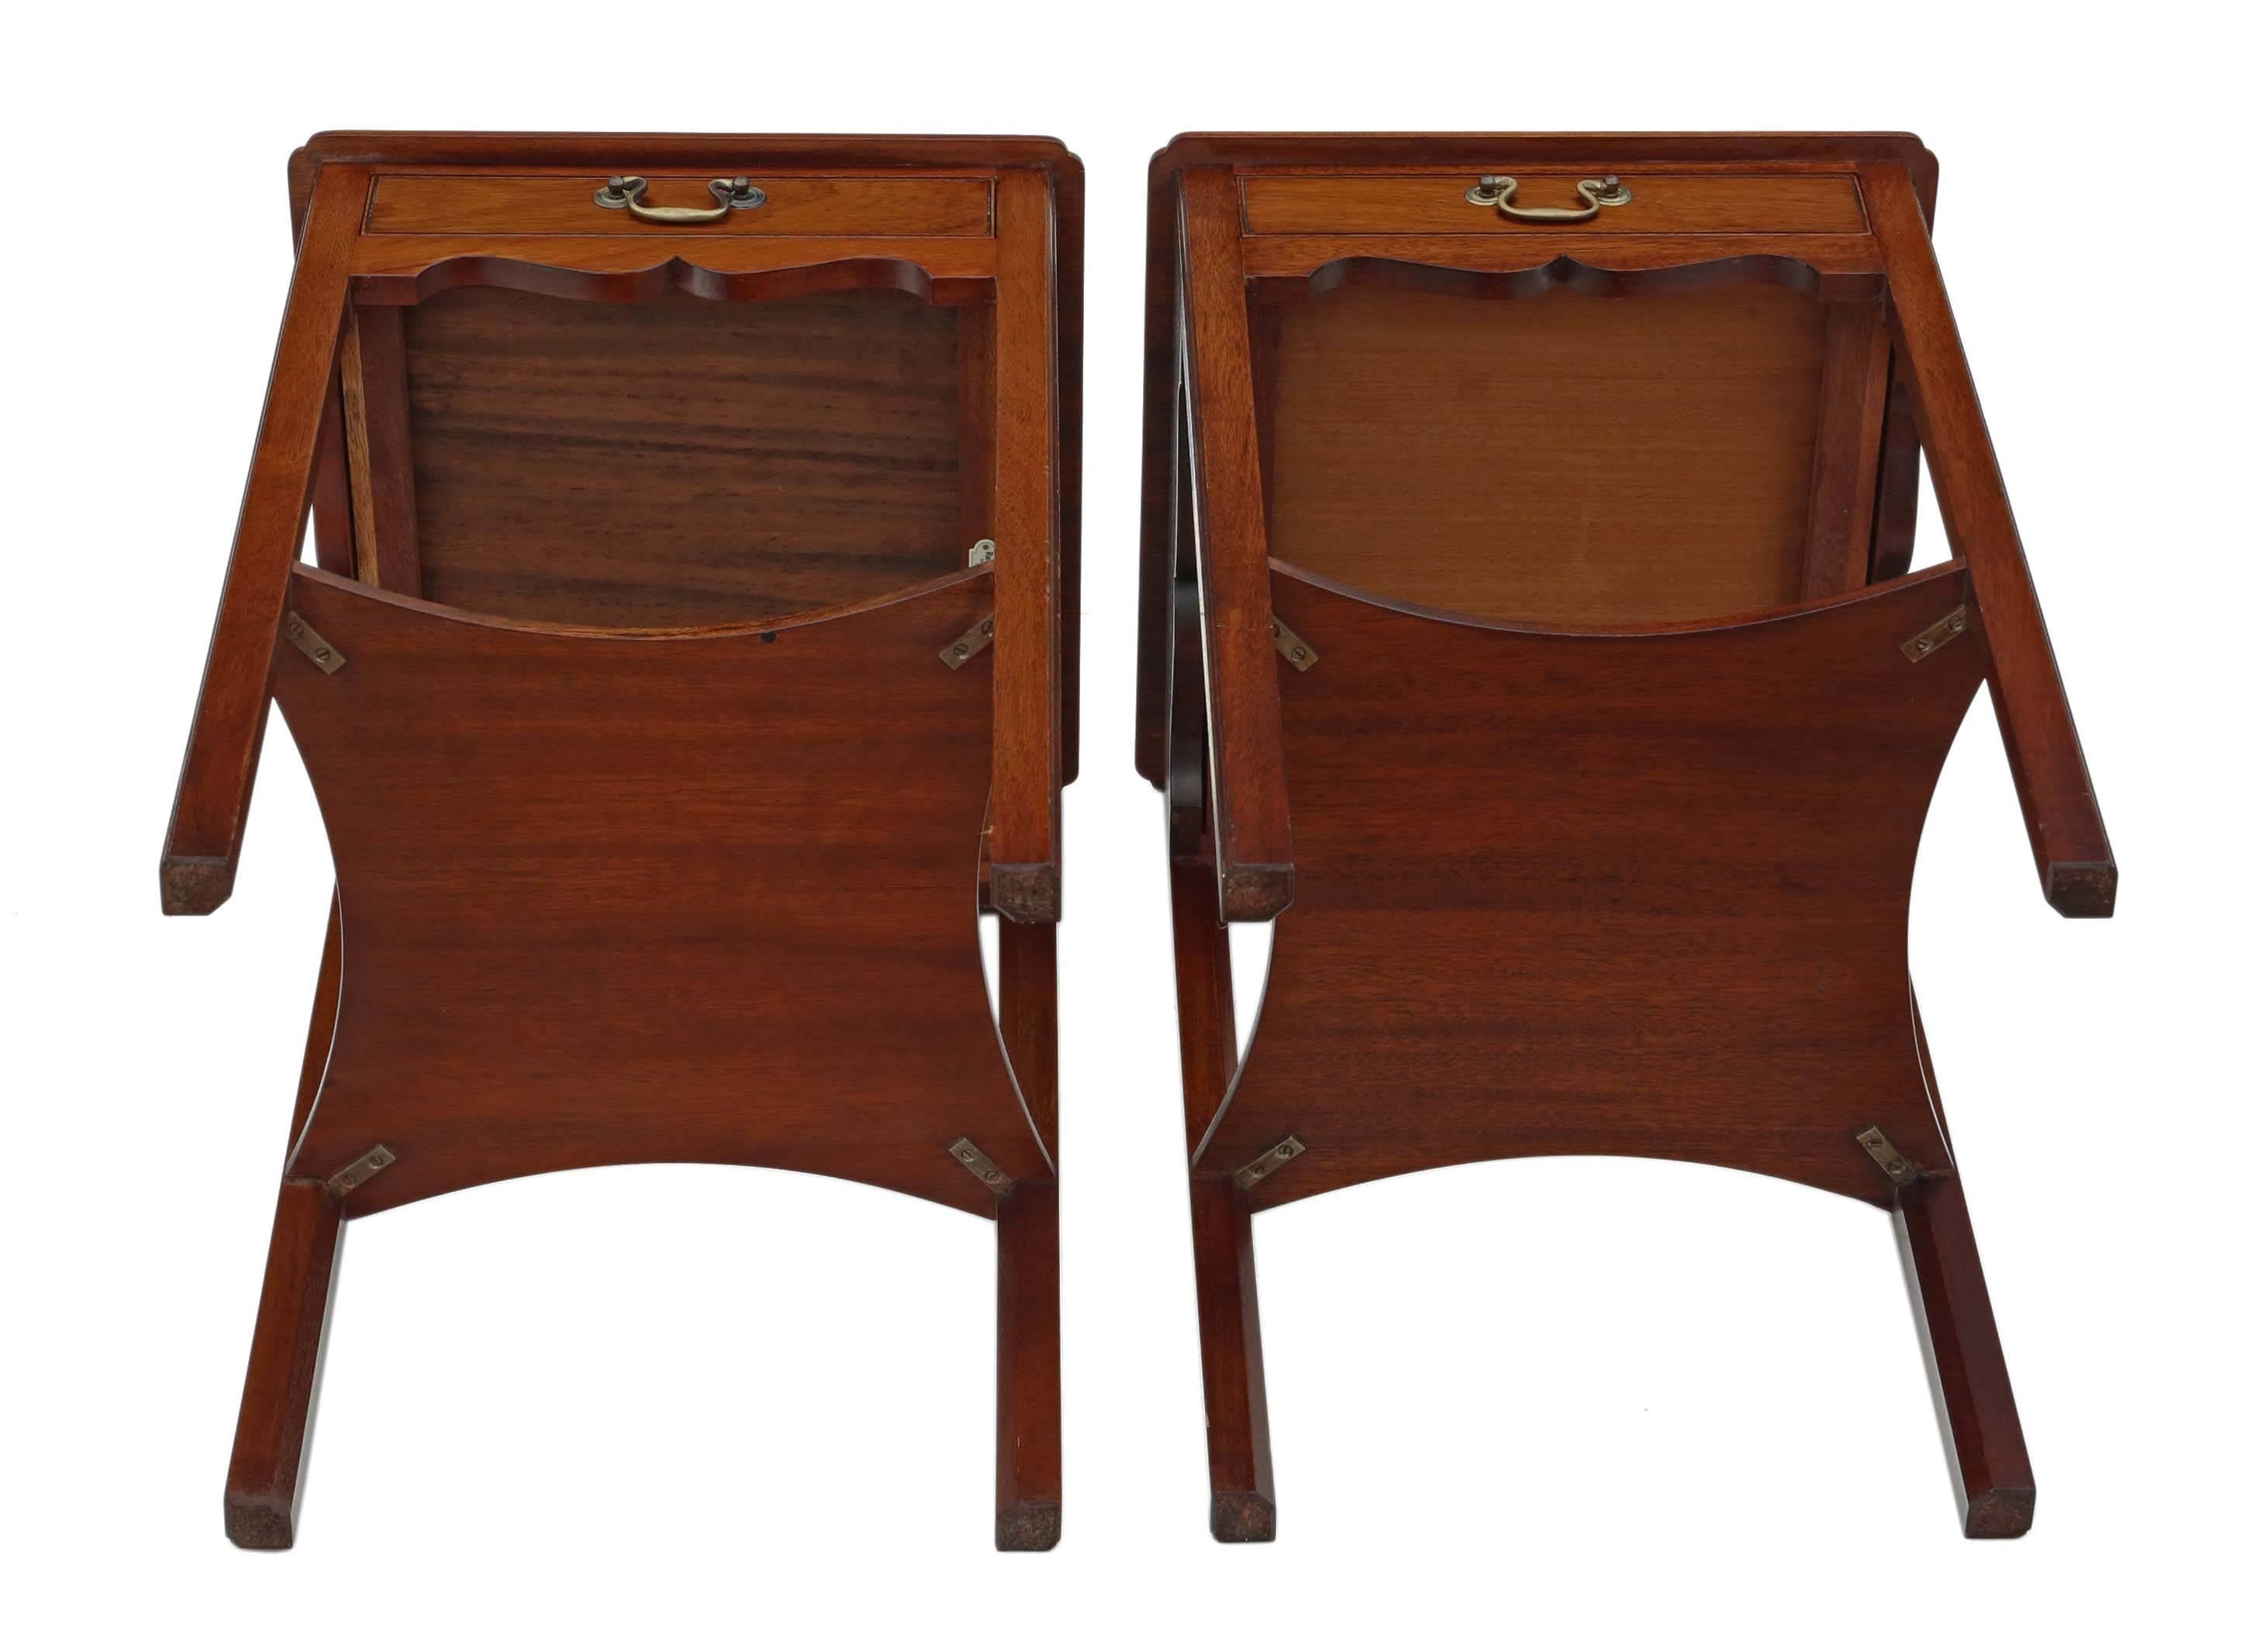 Antique Pair of Georgian Mahogany Bedside or Lamp Tables Redman and Hales For Sale 1